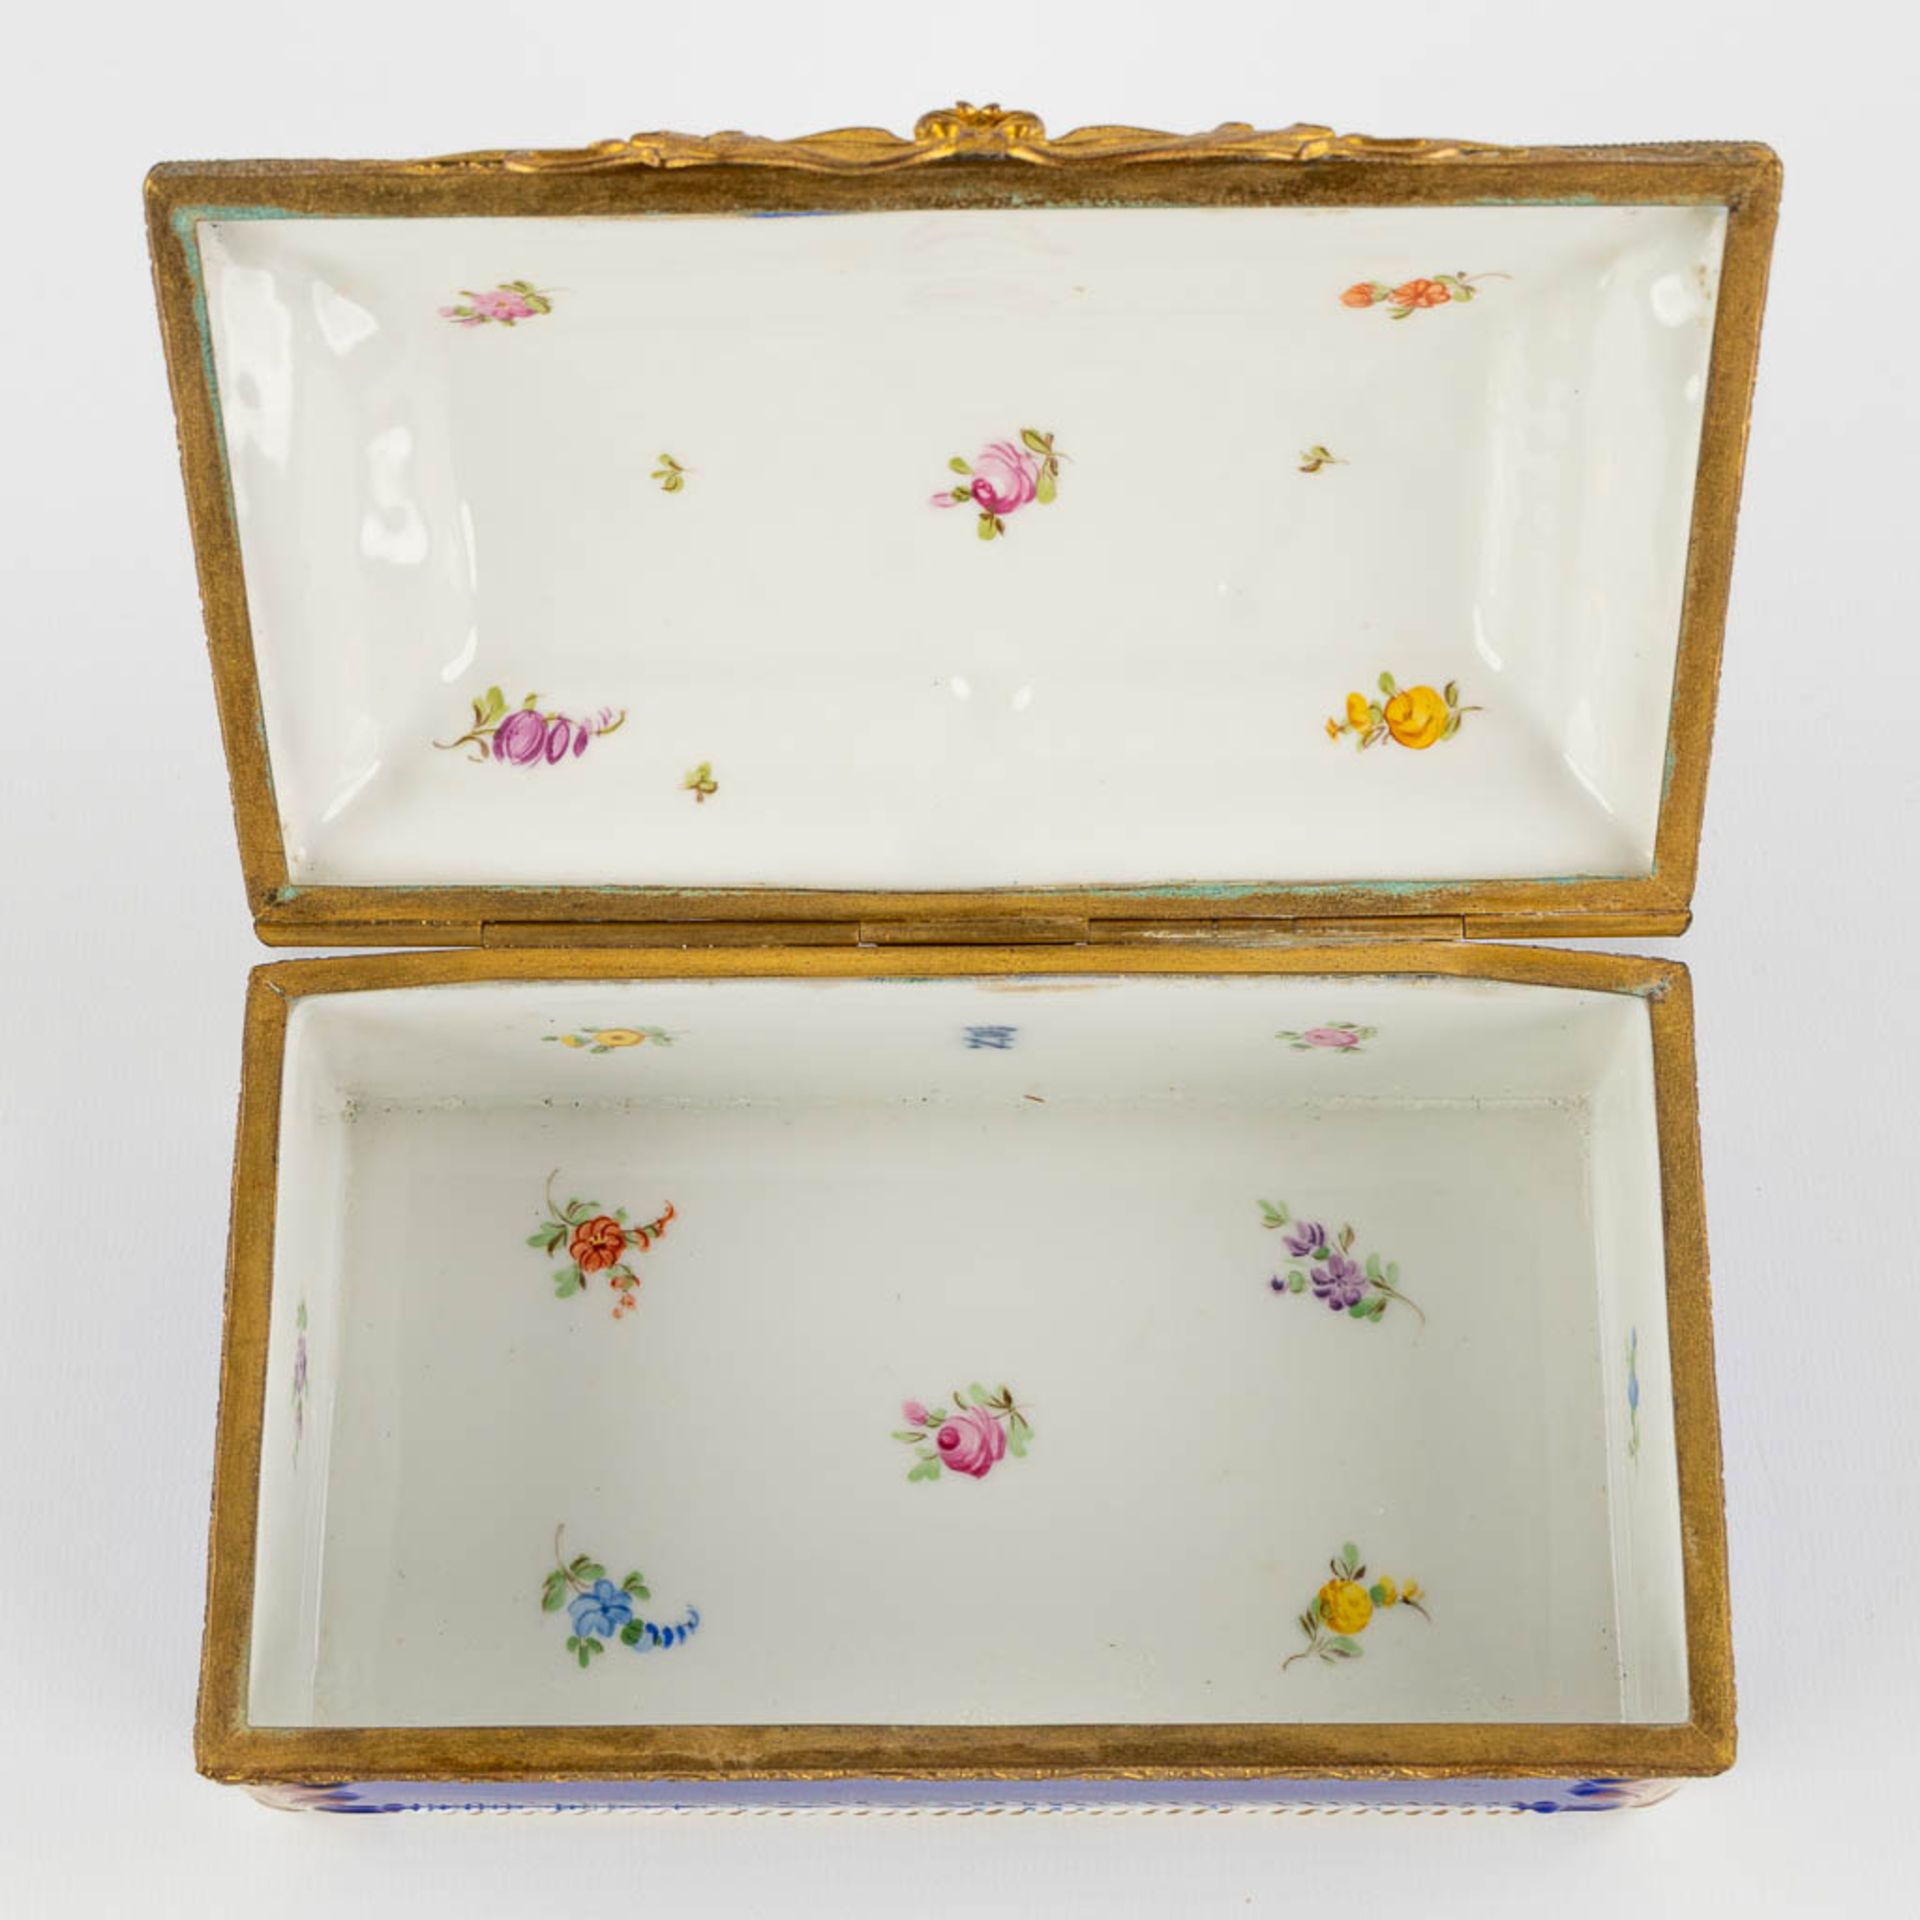 Capodimonte, a finely made porcelain jewellery box. 19th C. (L:10 x W:19 x H:7 cm) - Image 11 of 12